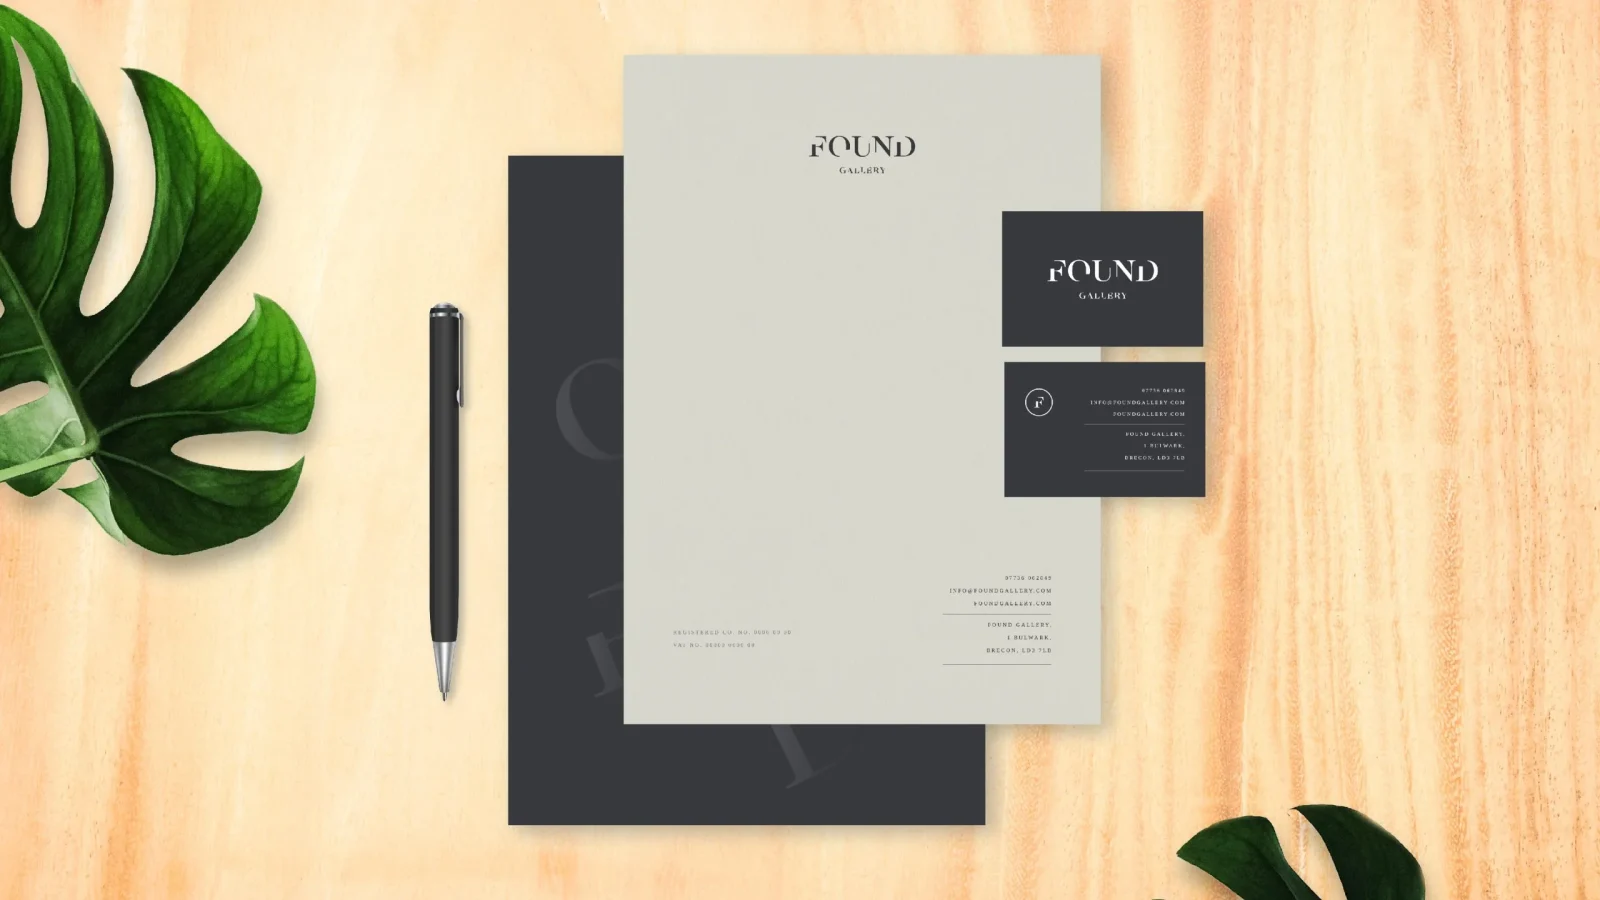 A neatly arranged stationery set on a light wooden surface, showcasing a gray business folder, brand design business cards, and a pen, accompanied by a green leafy plant.